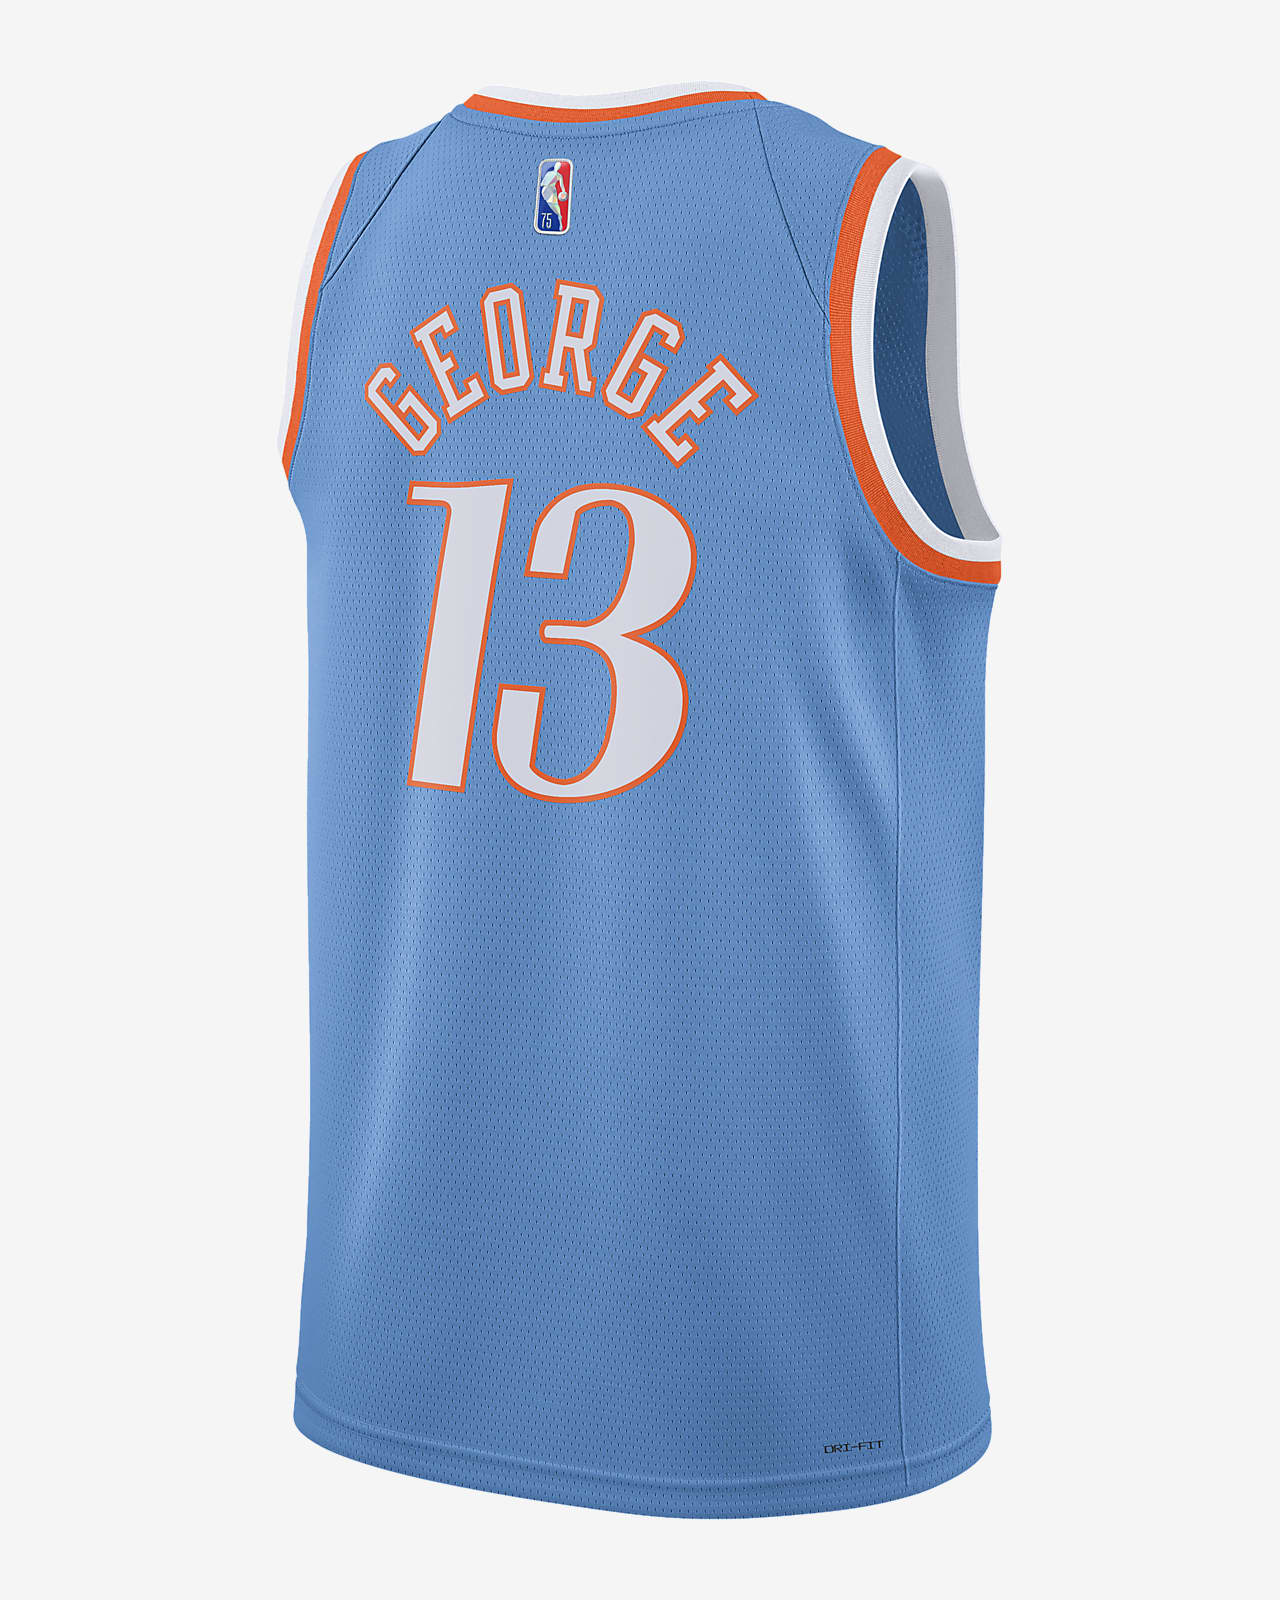 san diego clippers jersey,OFF 71%,www.concordehotels.com.tr